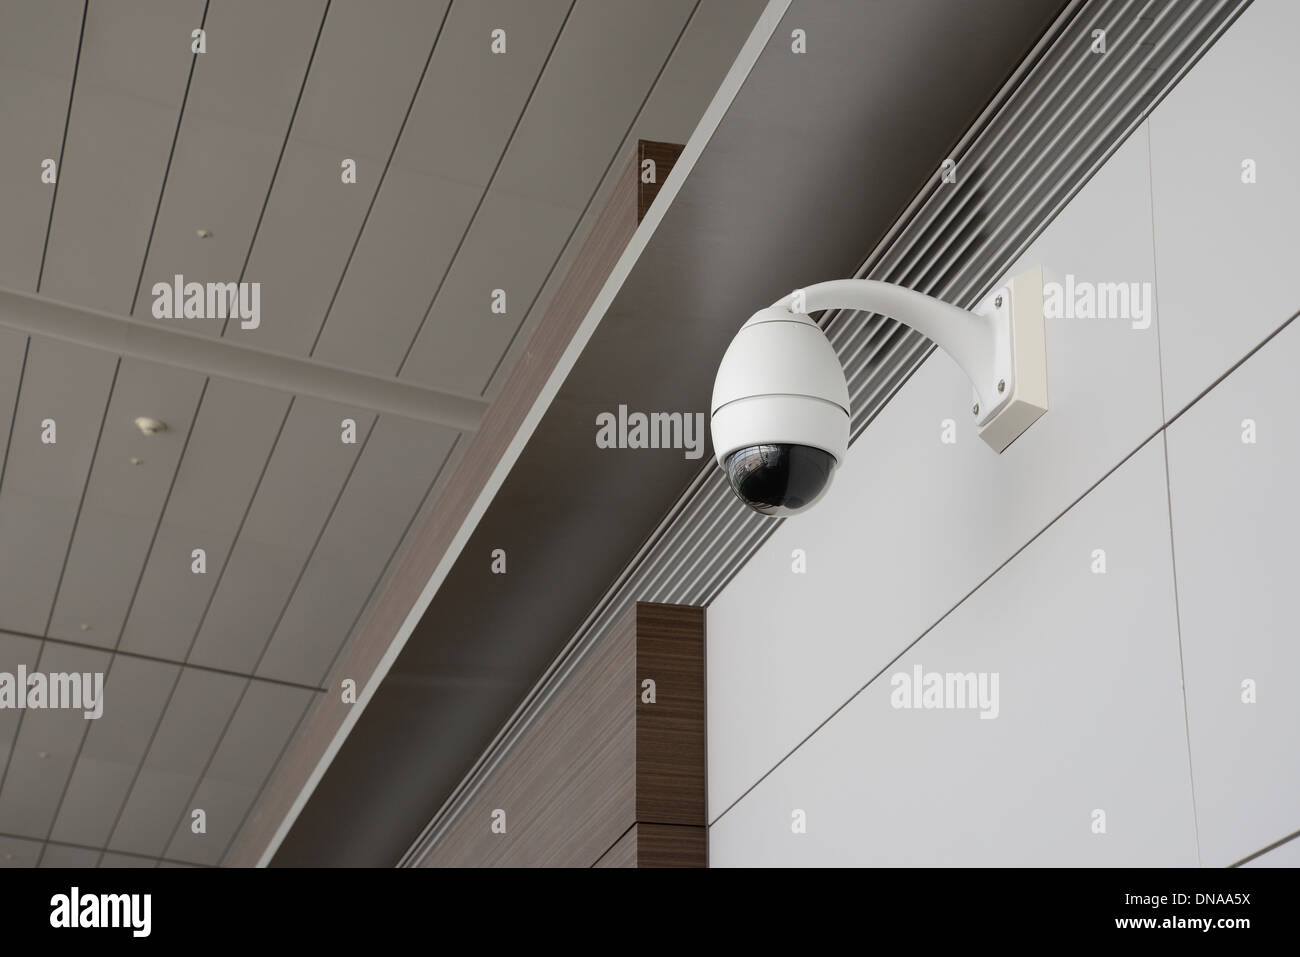 cctv on a wall Stock Photo